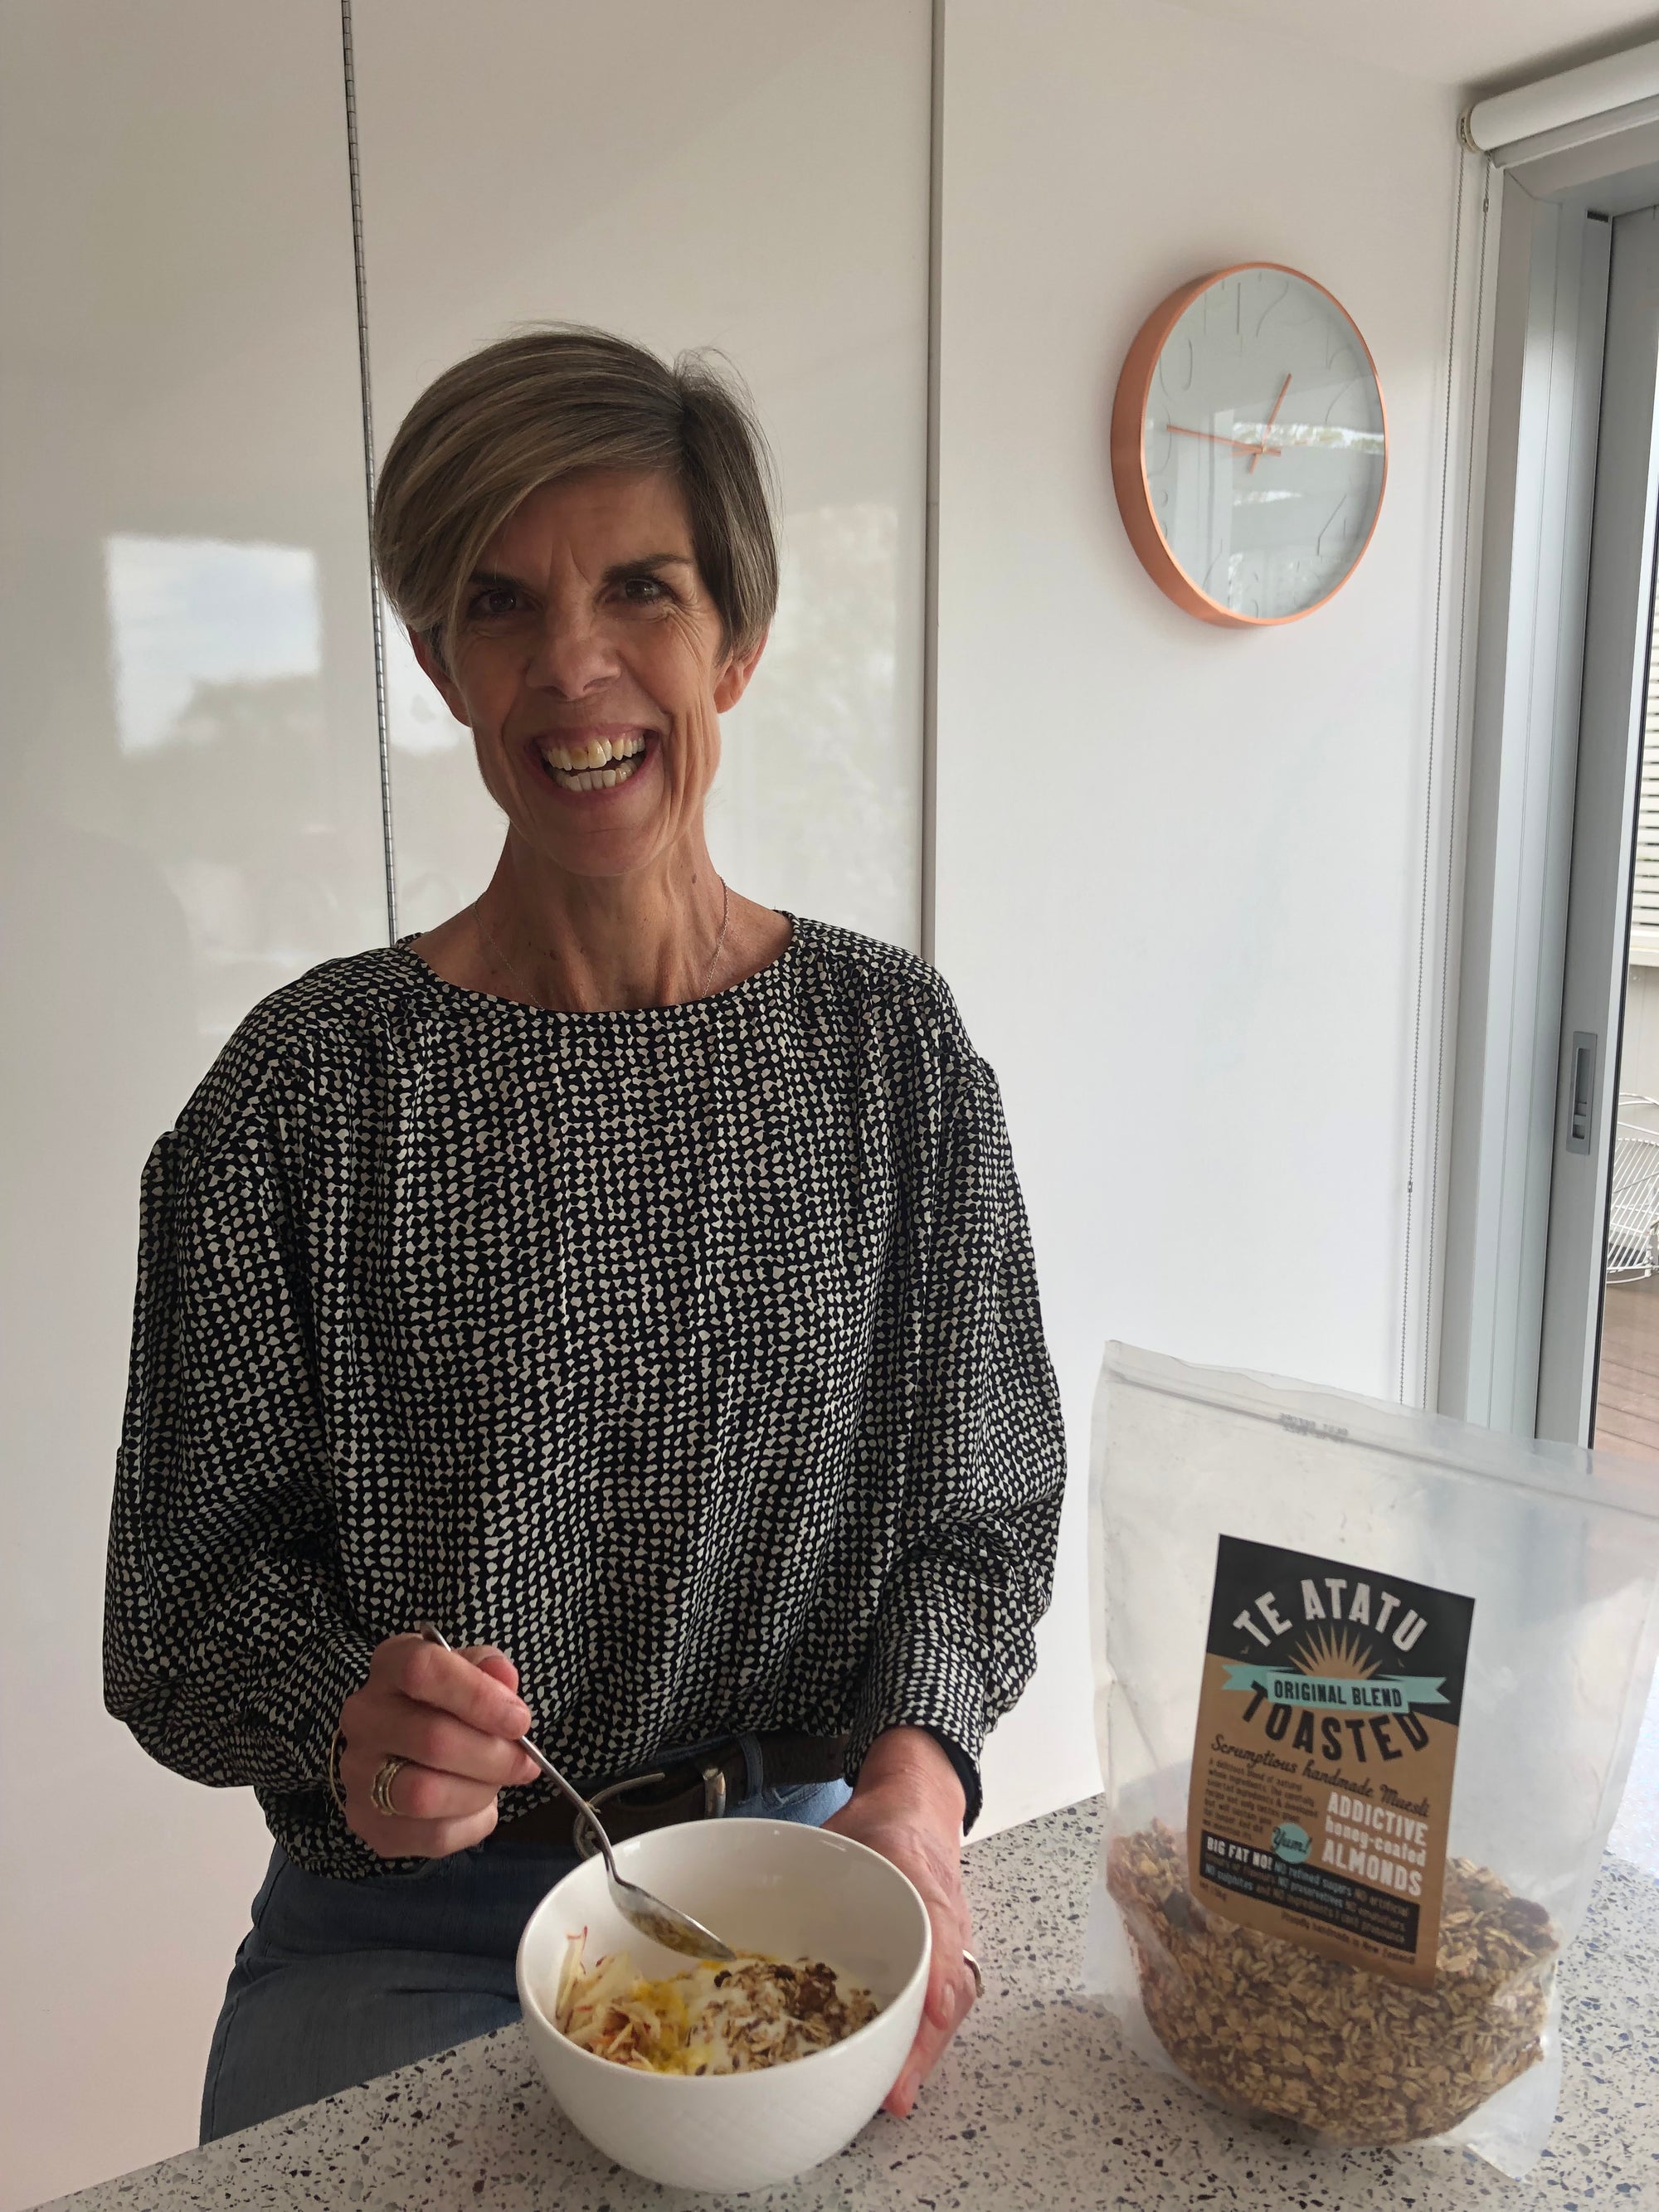 Tara loves the Original Blend because it is a natural low sugar muesli made with local ingredients